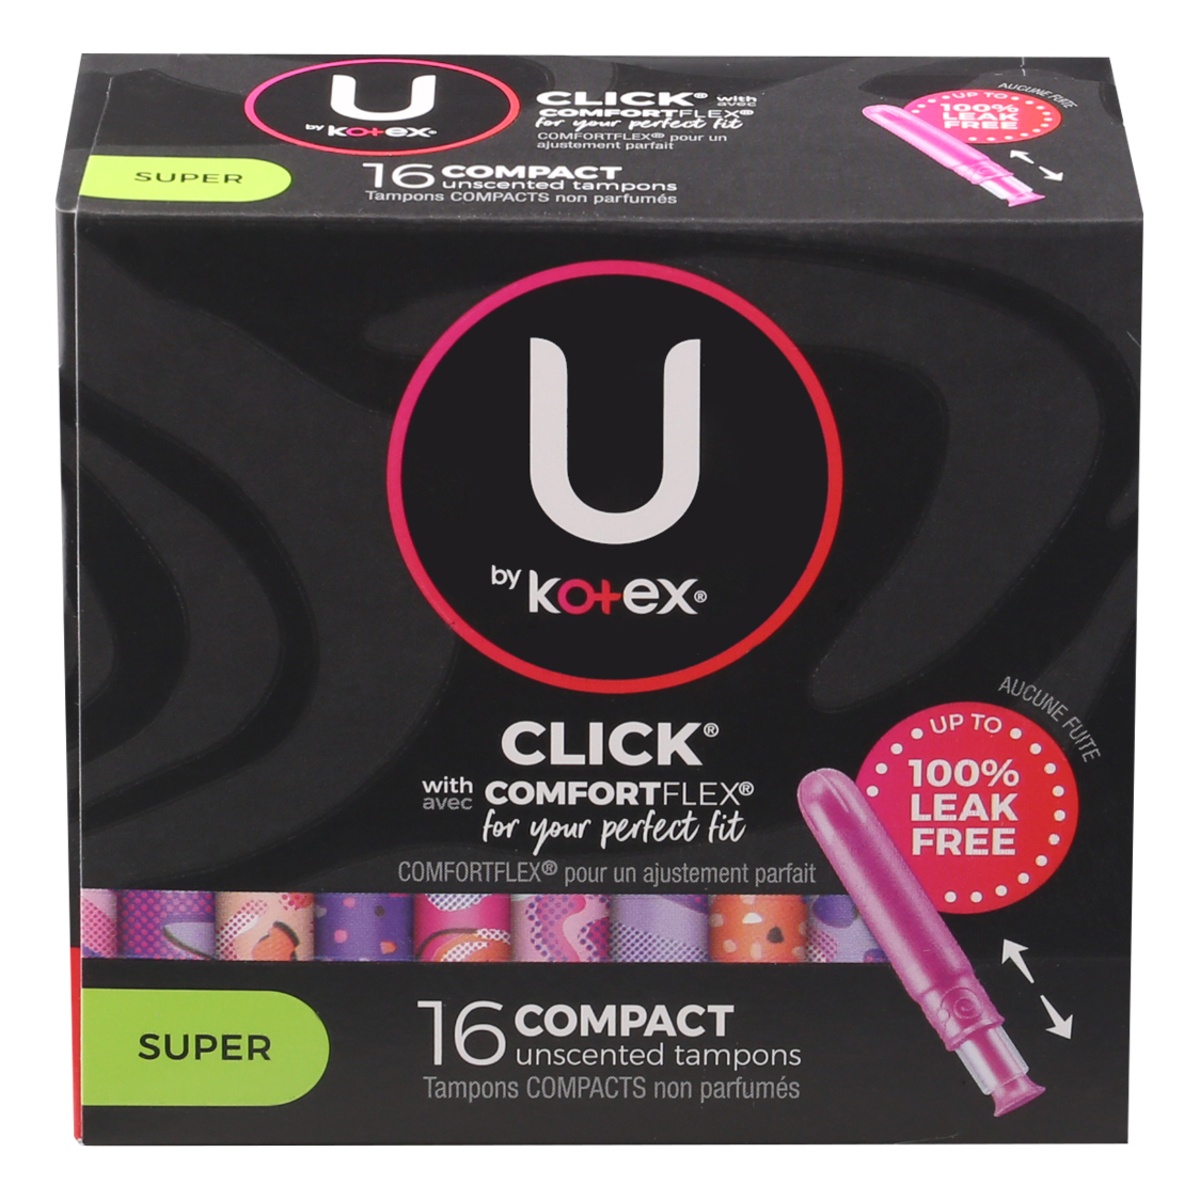 slide 1 of 25, U by Kotex Super Click Compact Tampons, 16 ct